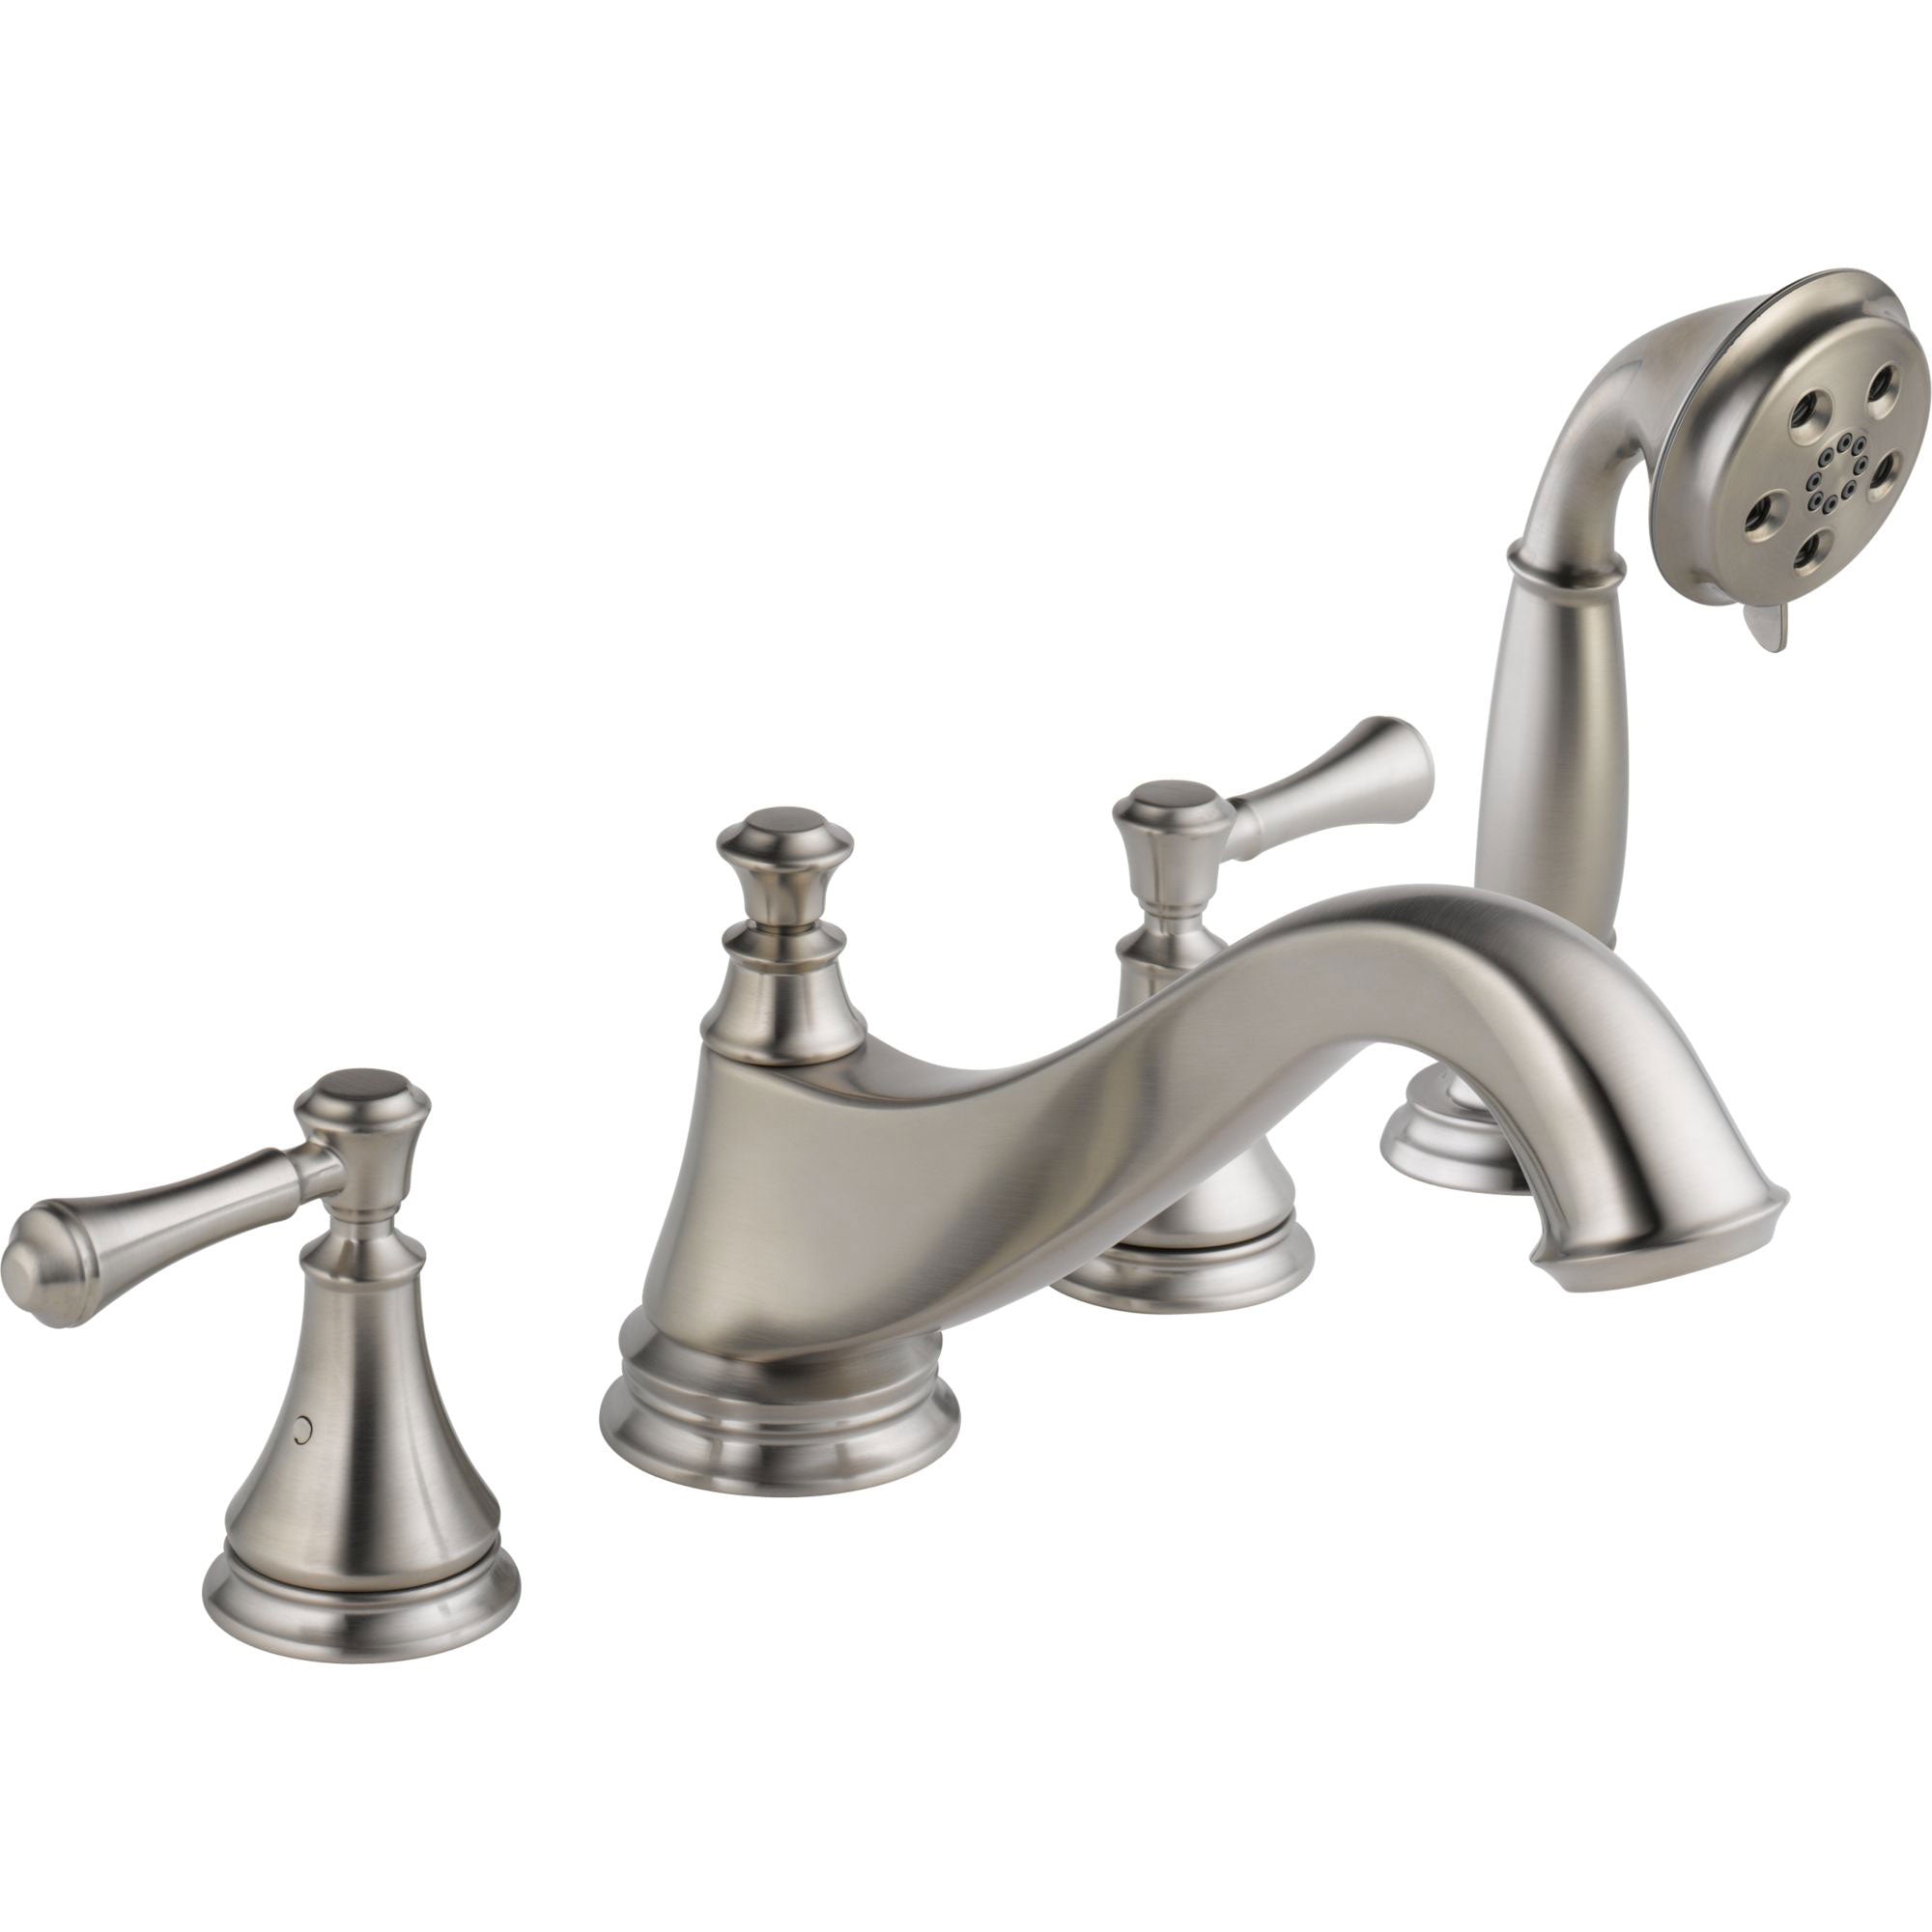 Delta Cassidy Stainless Steel Finish Low Arc Spout Roman Tub Filler Faucet with Hand Shower Spray INCLUDES Valve and Lever Handles D1069V